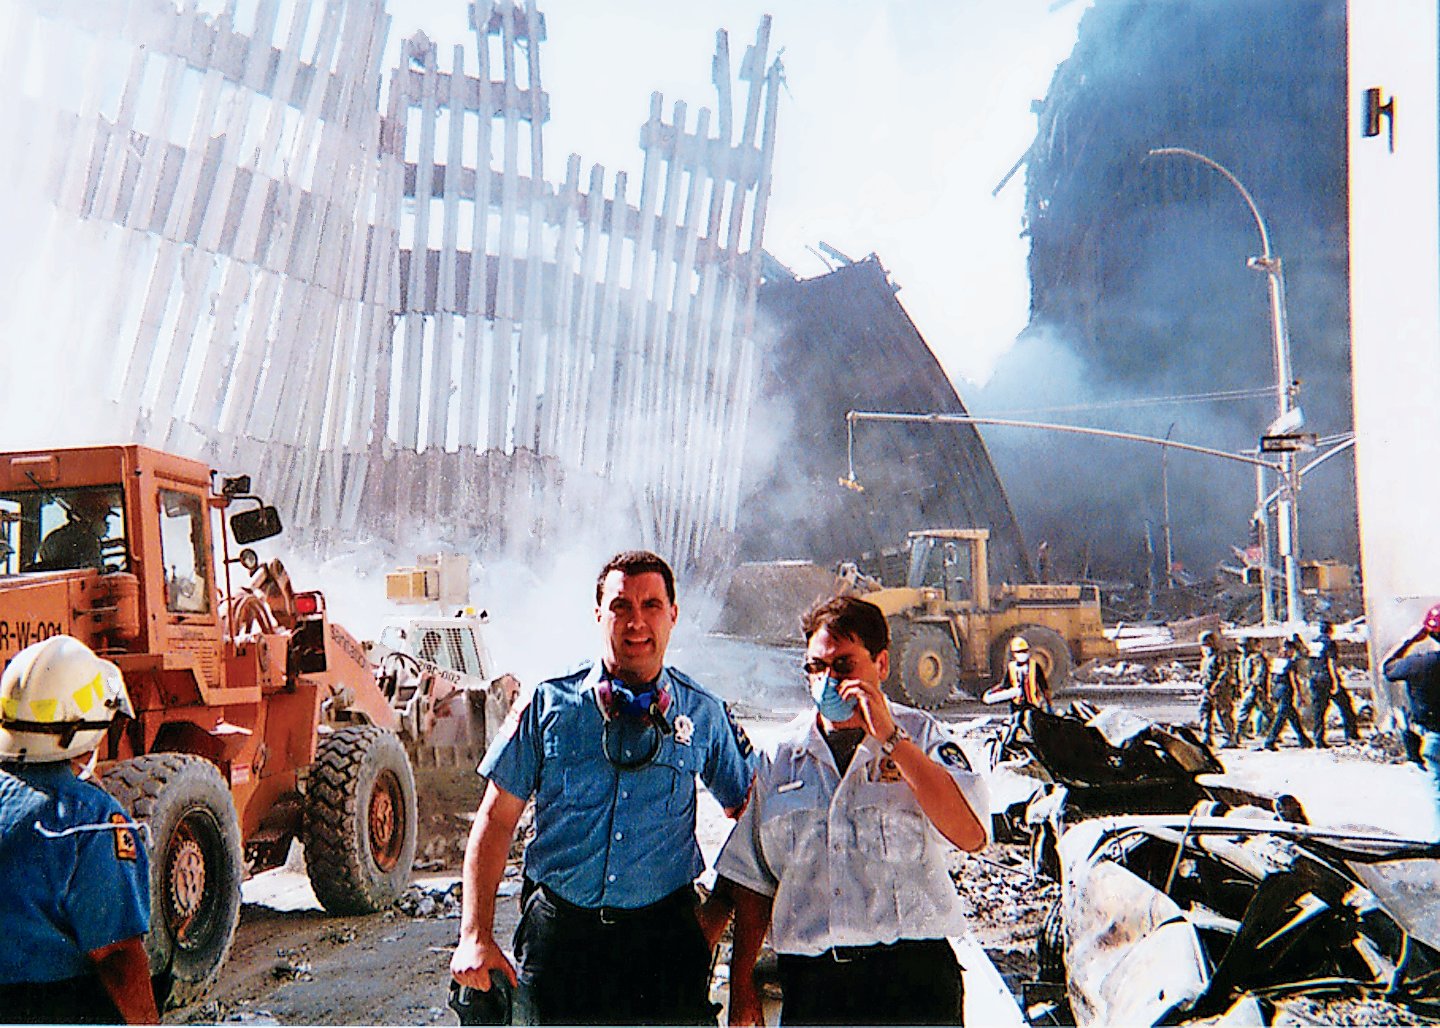 Bellmore-Merrick EMS volunteers Kevin Kelly and Matt Weinick amid the debris at the World Trade Center site in 2001.